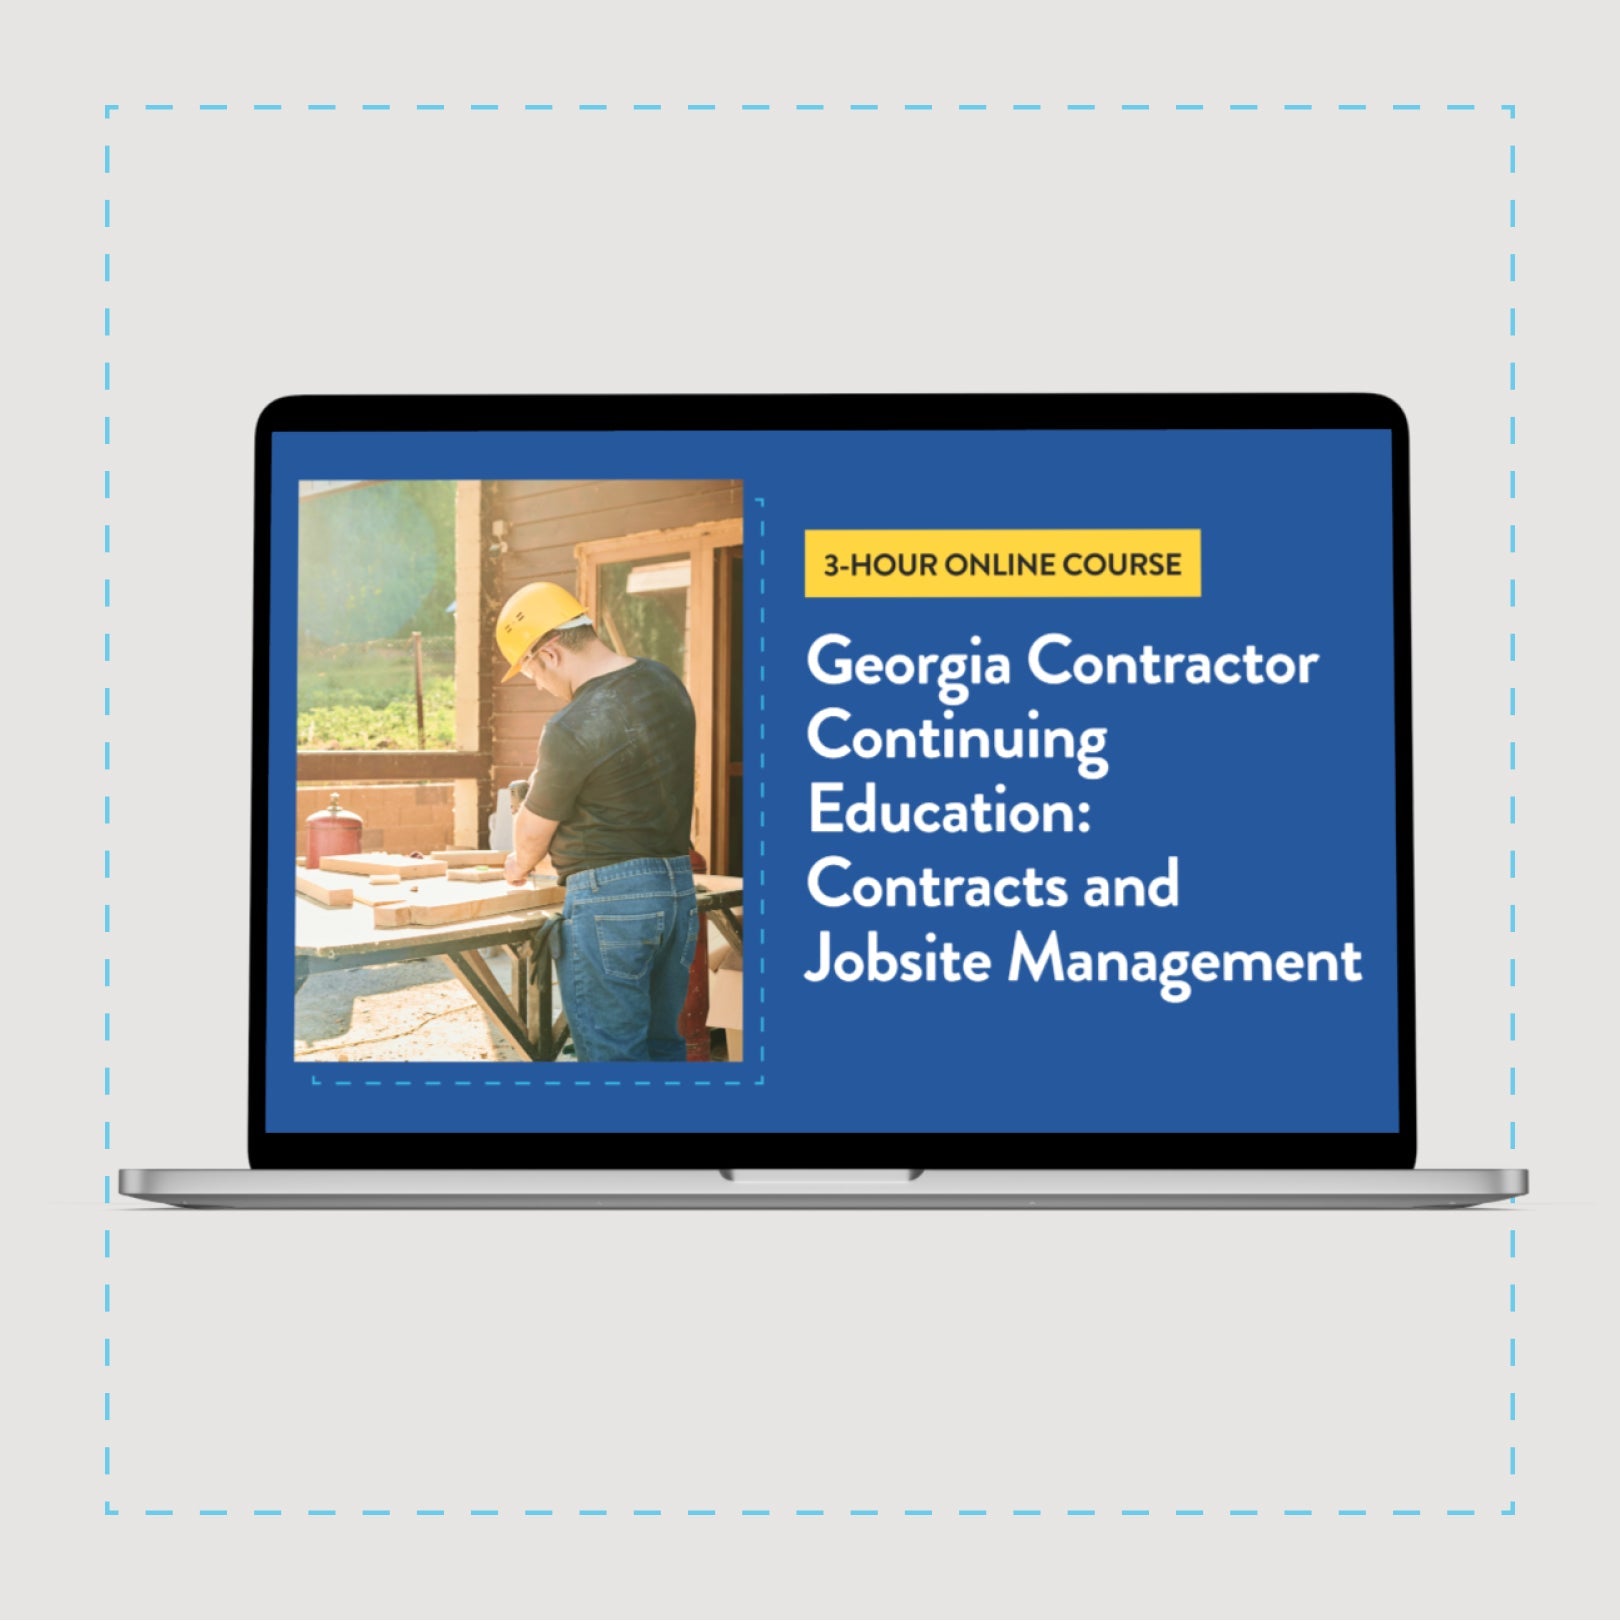 Georgia Contractor Continuing Education: Contracts and Jobsite Management - 3-Hour Online Course